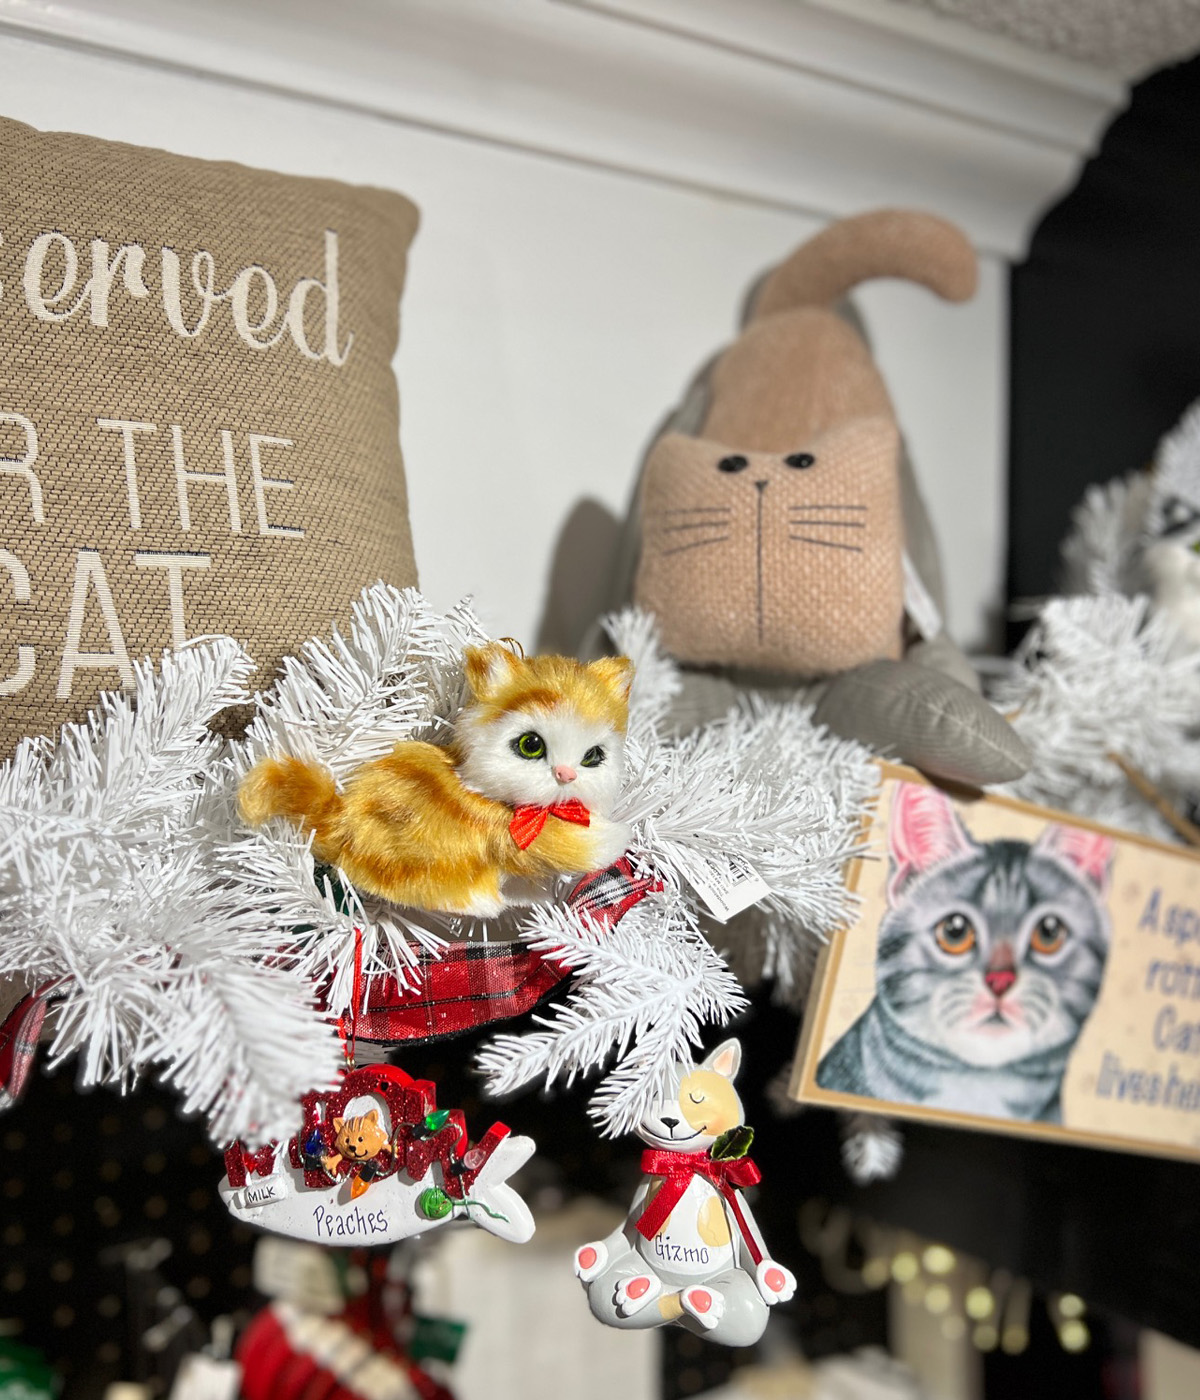 Cat Christmas Ornaments and signage